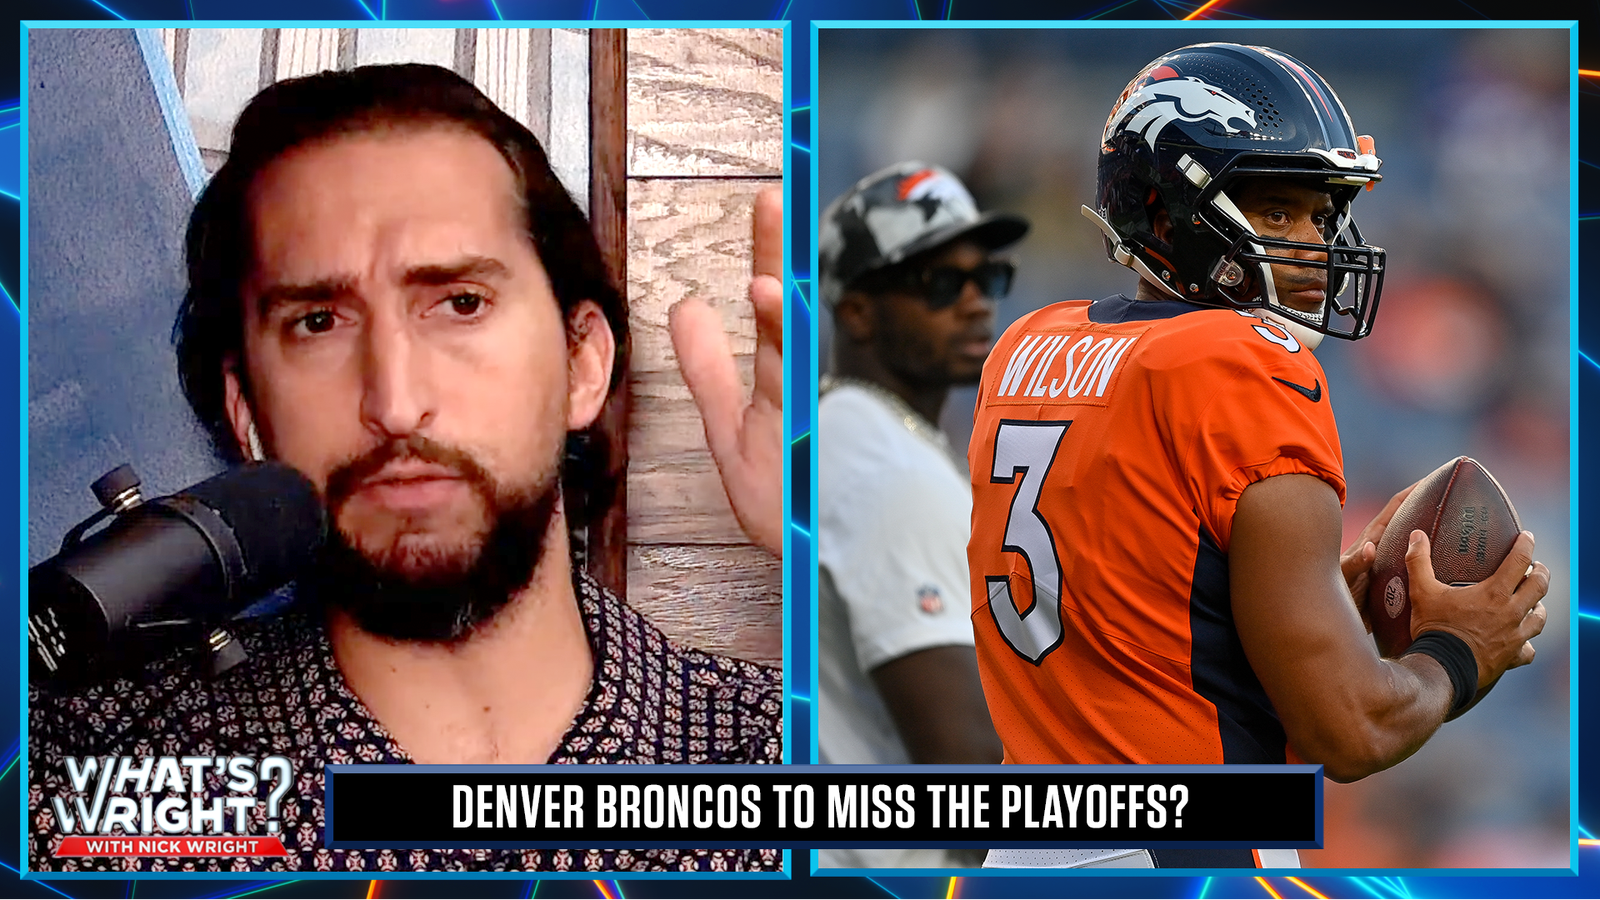 Nick Wright is selling Russell Wilson and the Broncos making the playoffs | What's Wright?